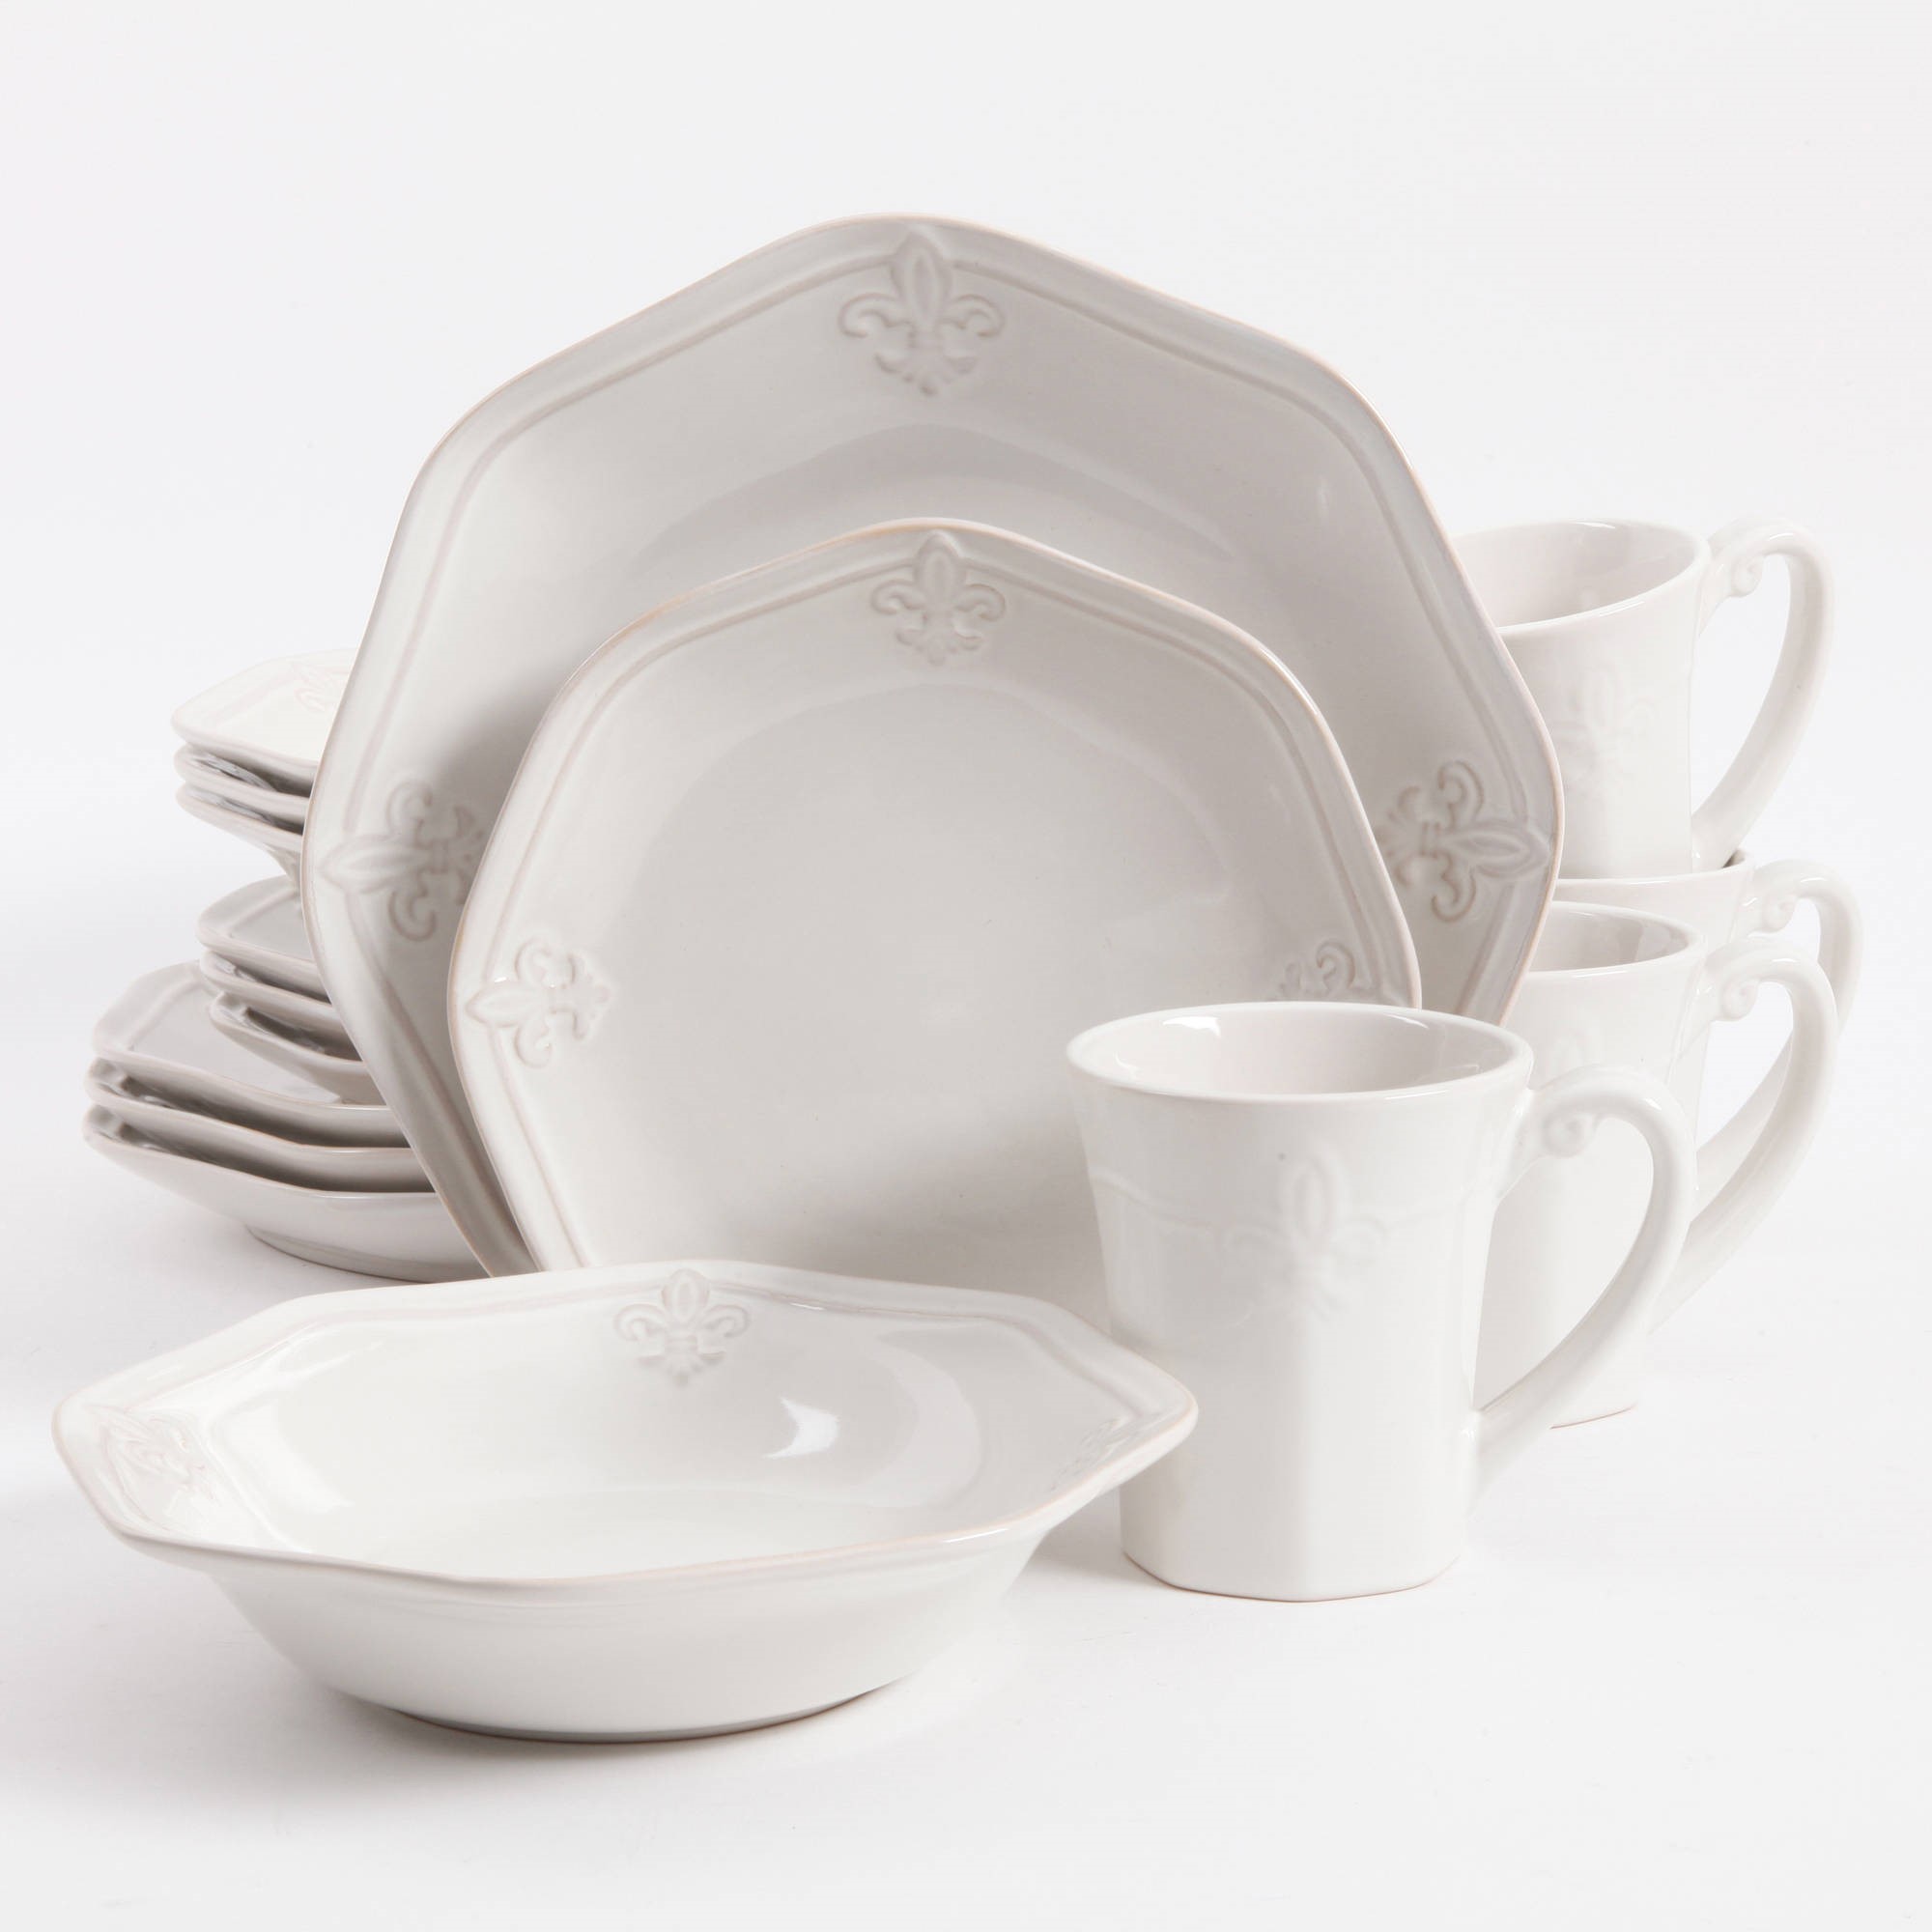 Better Homes & Gardens Country Crest Dinnerware, Set Of 16 - image 1 of 8